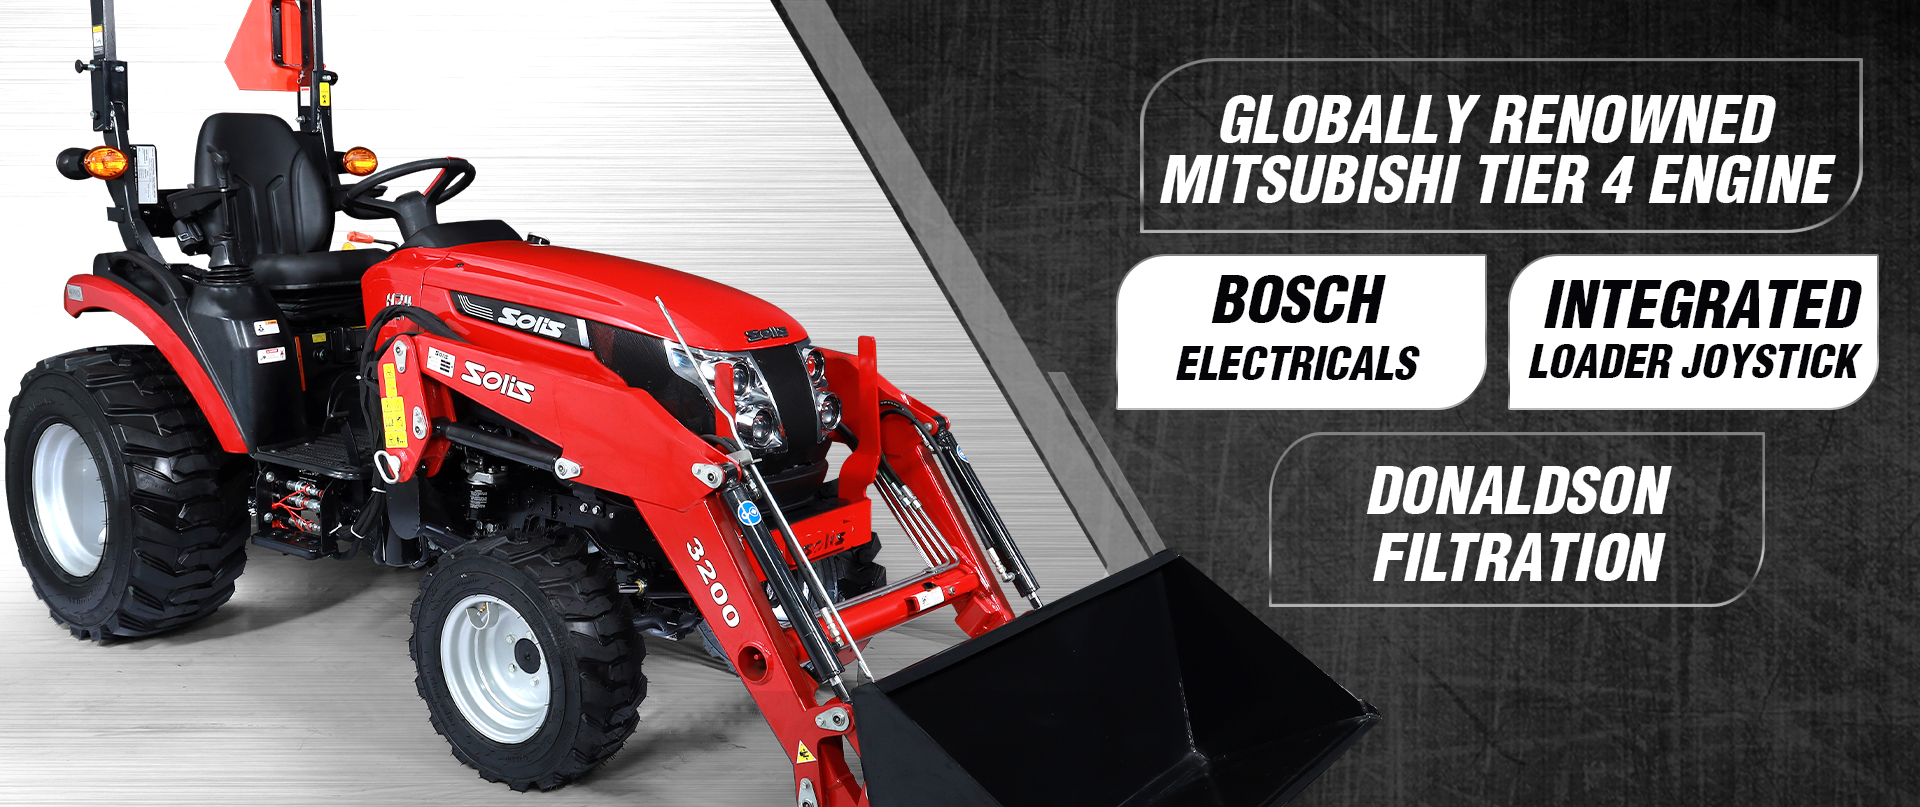 Solis H24 Compact Tractor - Globally Renowned Mitsubishi Tier 4 Engine, Bosch Electricals, Integrated Loader Joystick and Donalson Filtration